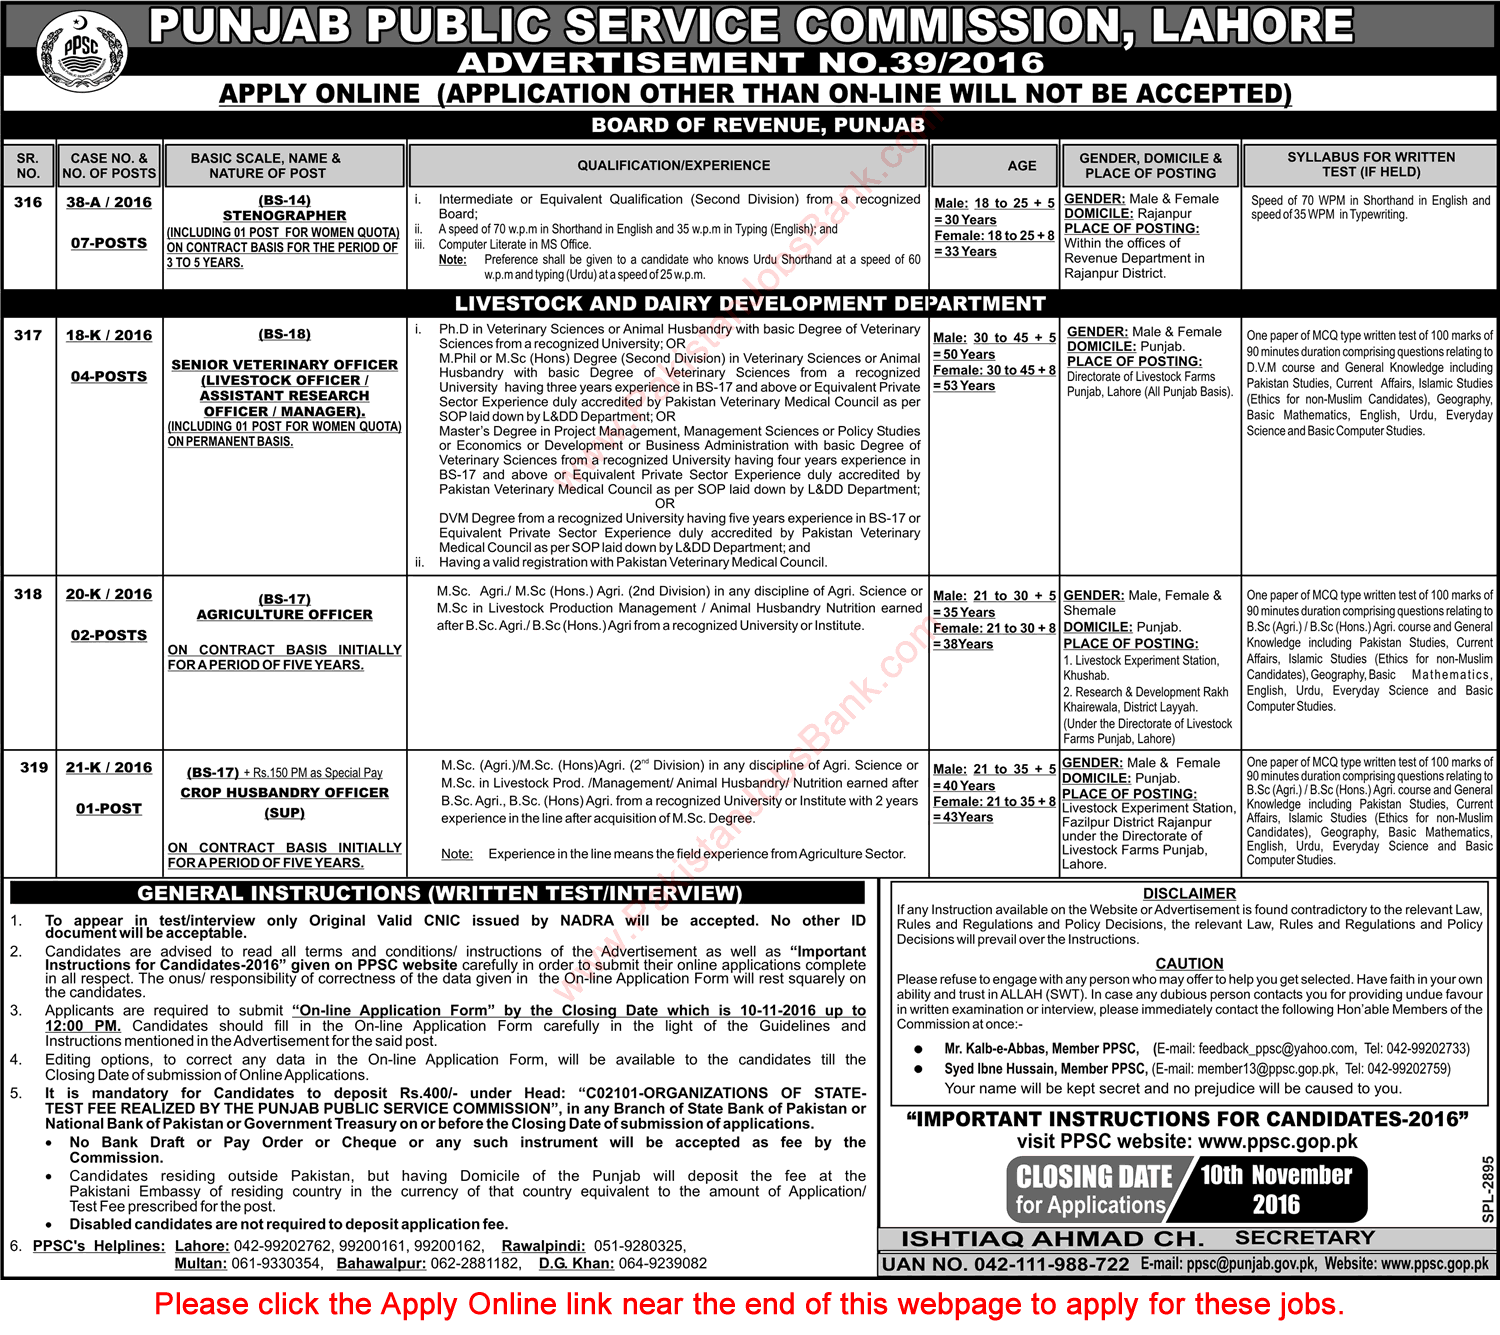 PPSC Jobs October 2016 November Consolidated Advertisement No 39/2016 Apply Online Latest